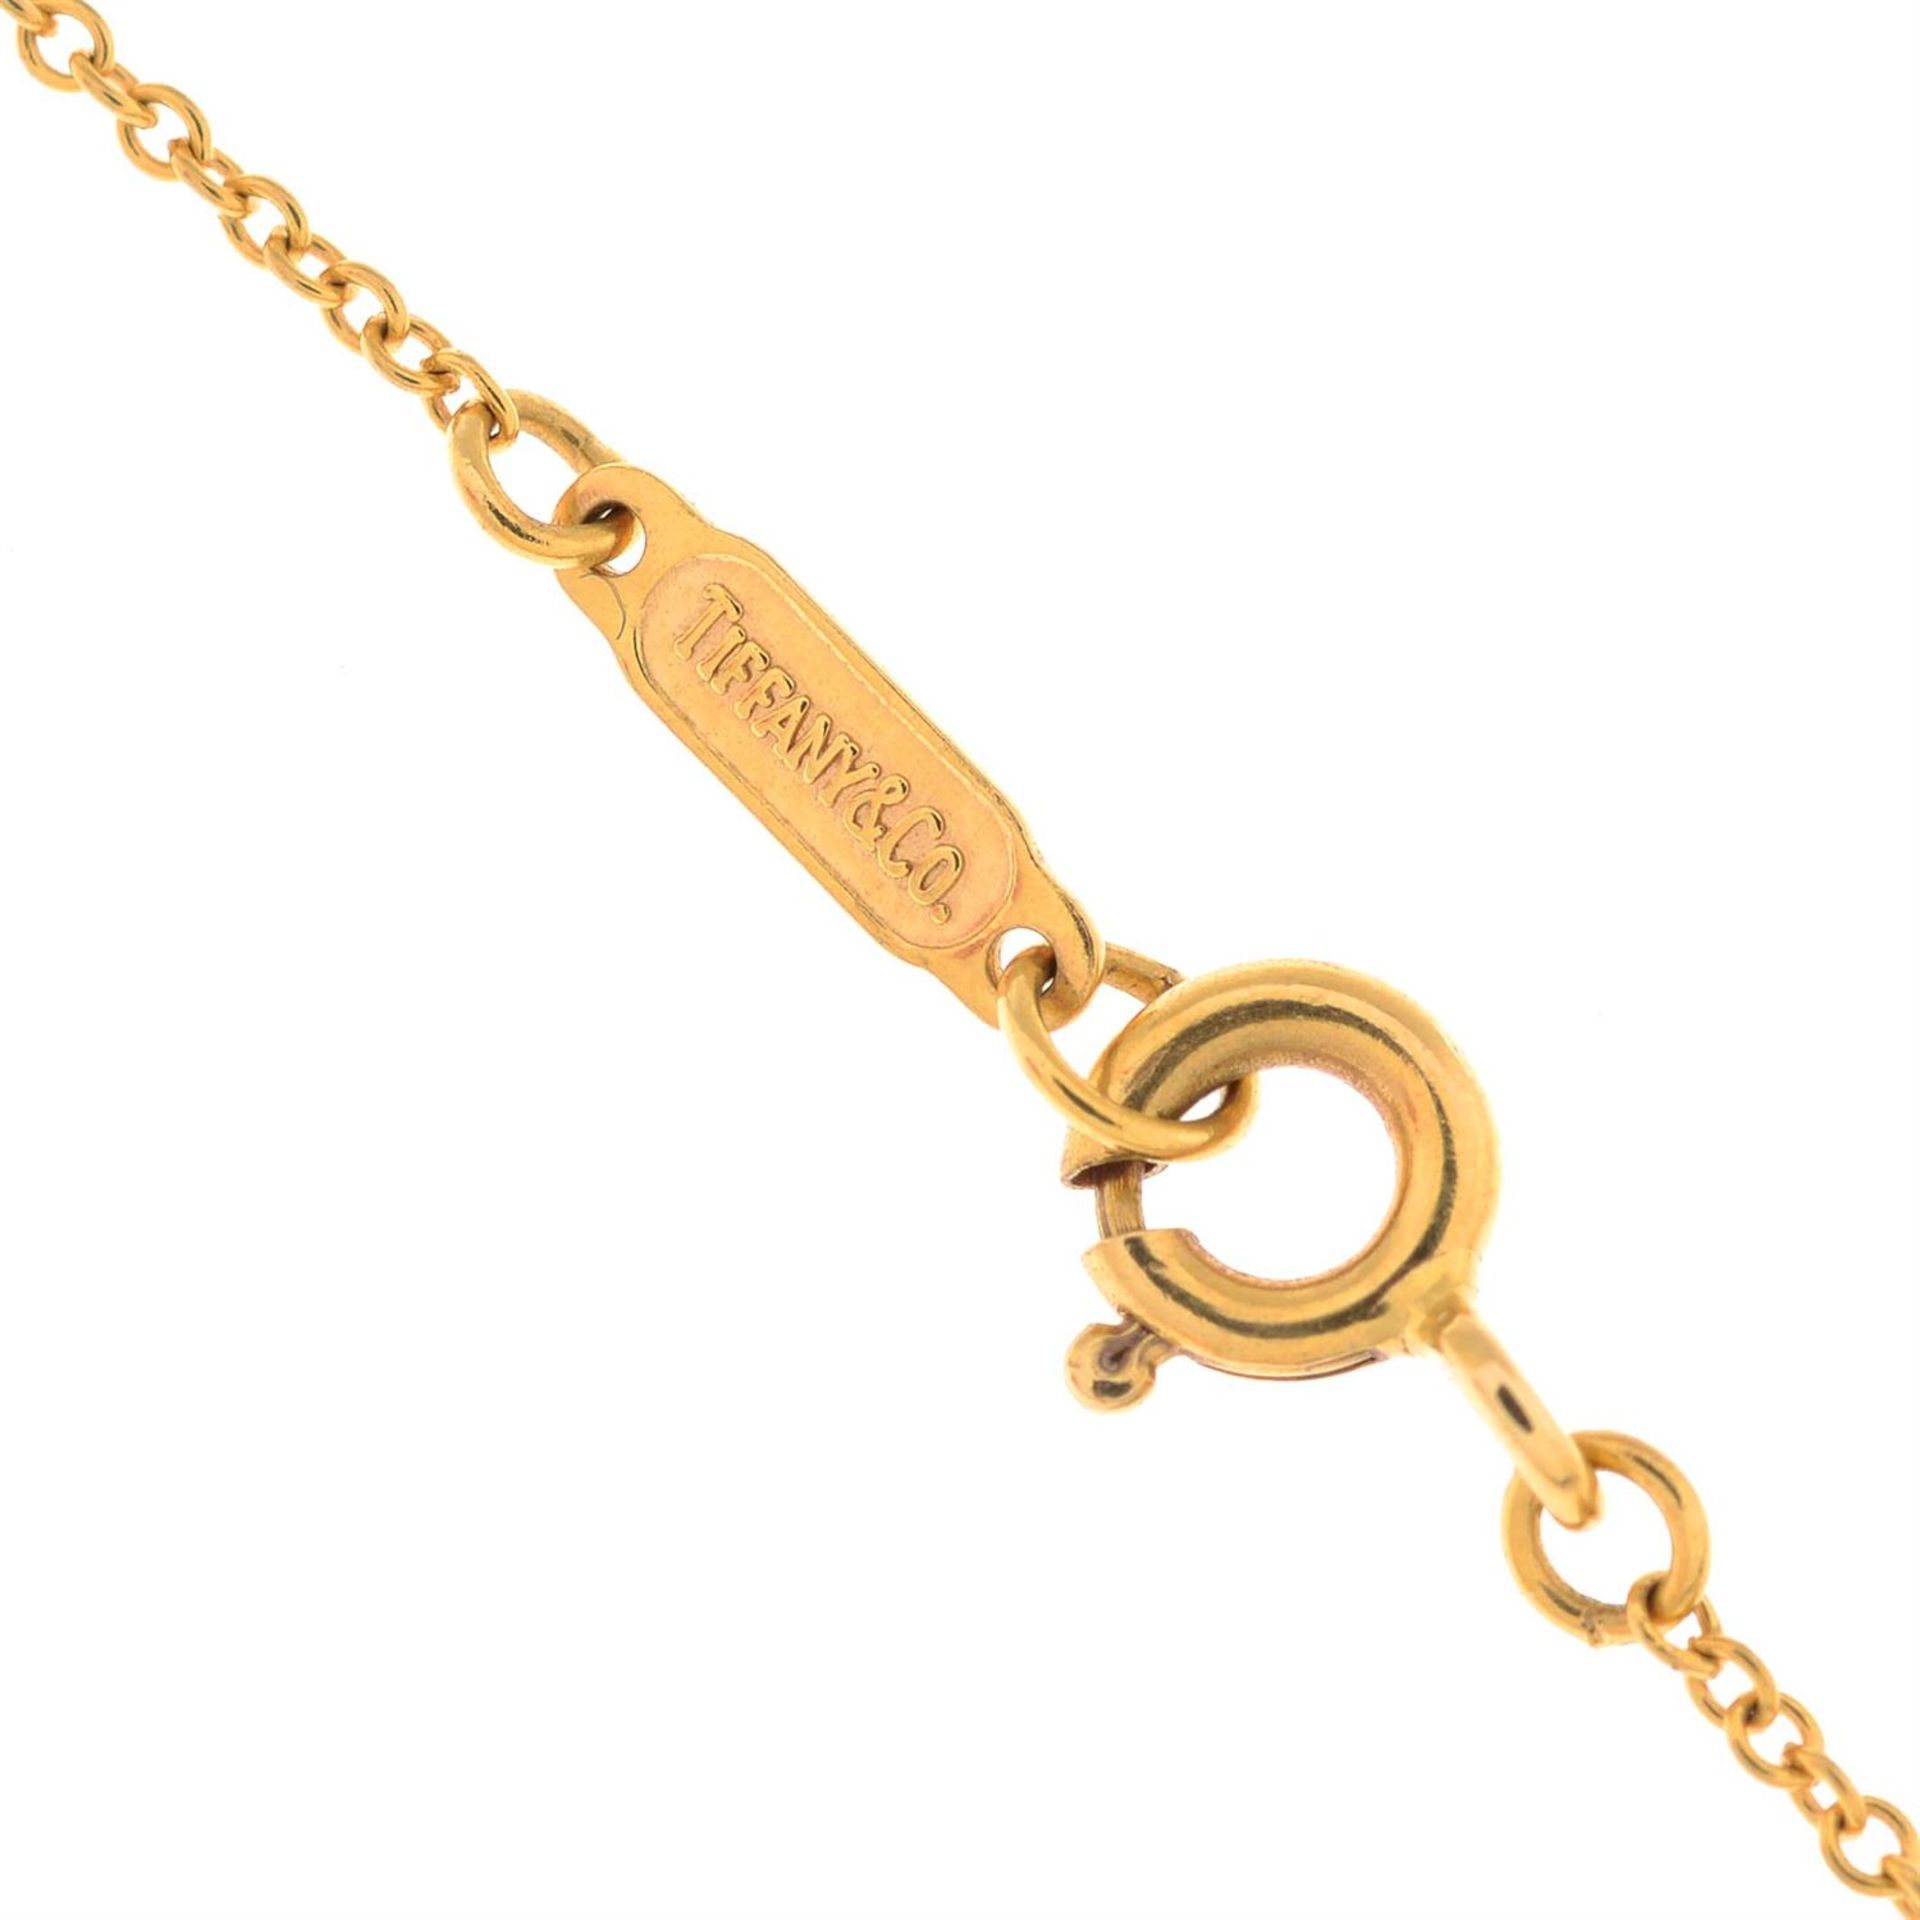 A heart pendant, with chain, by Tiffany & Co. - Image 3 of 4